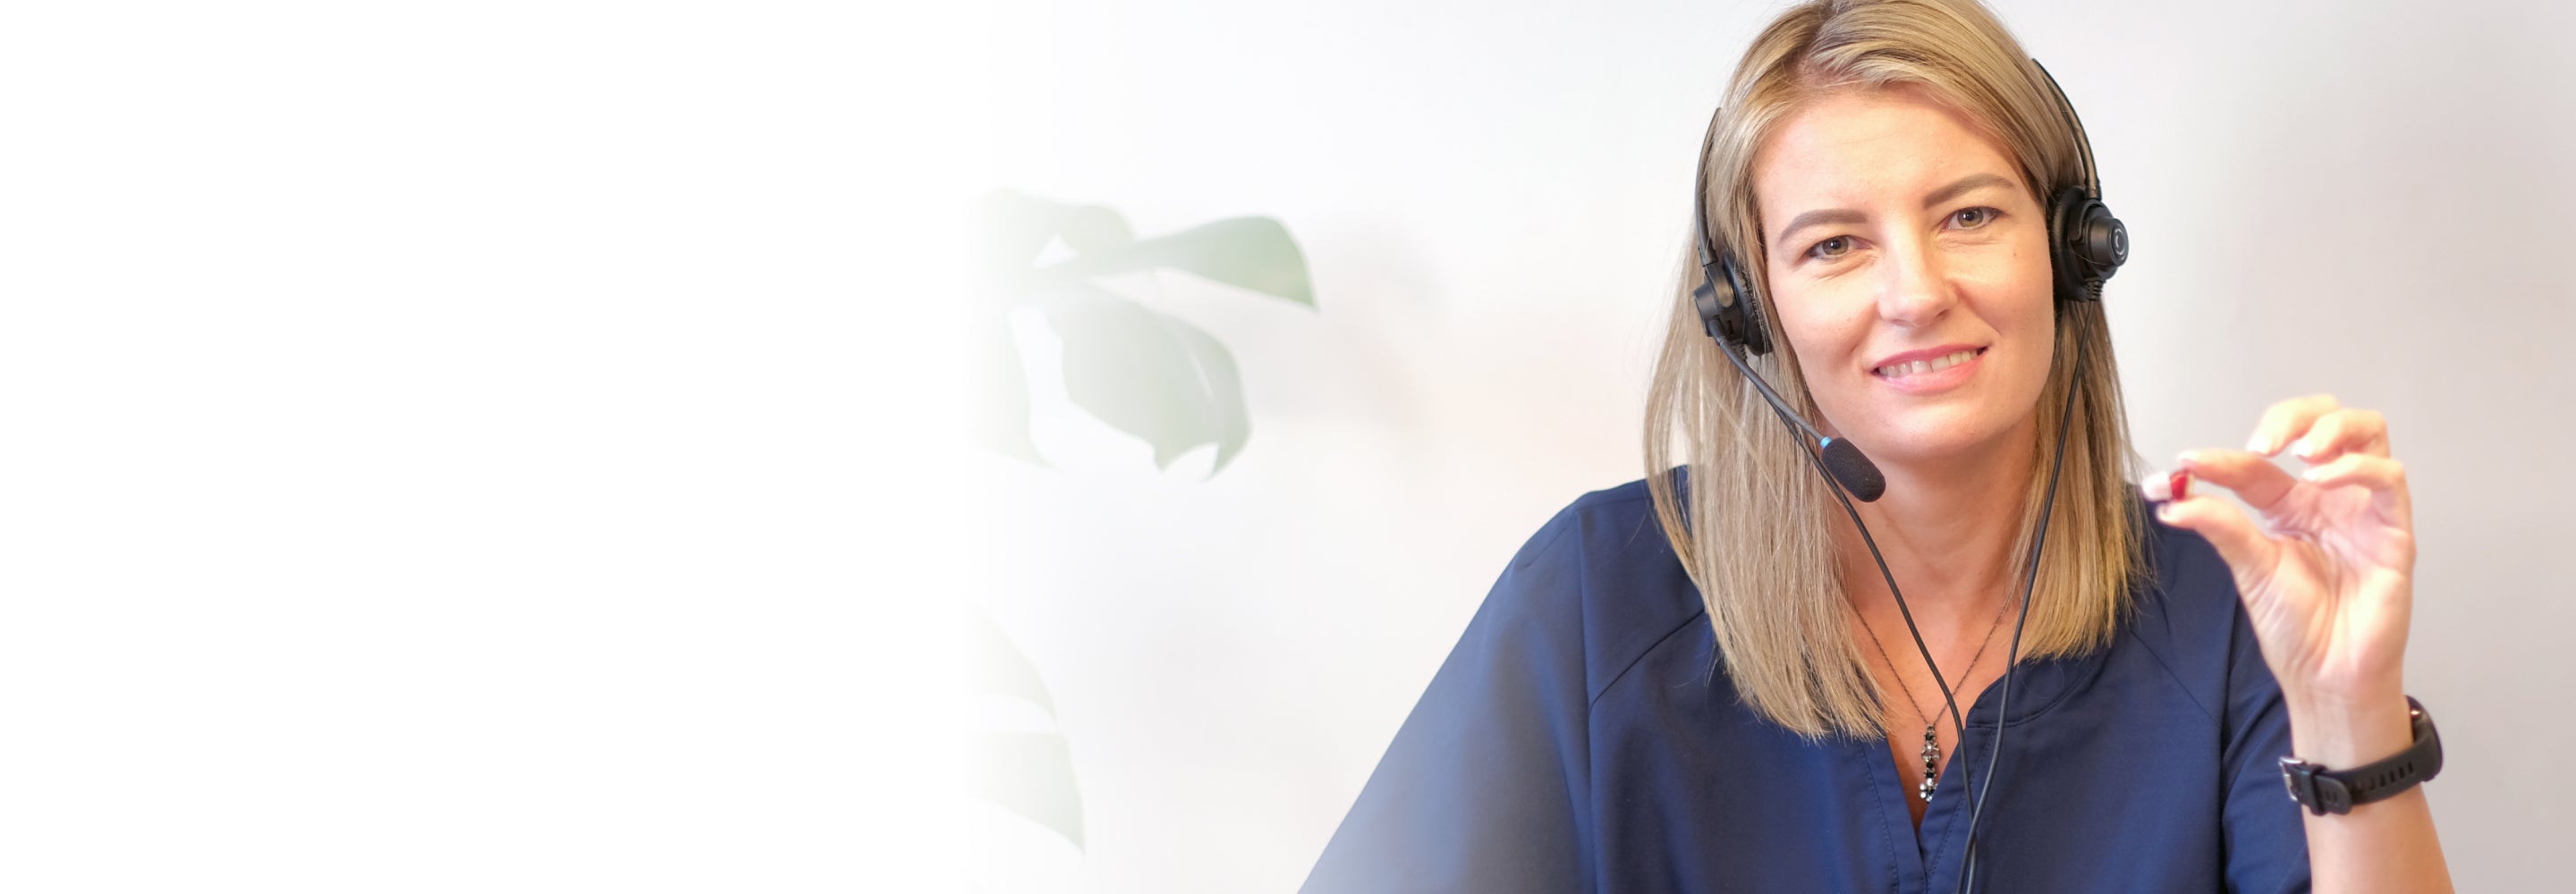 Smiling Go hearing aid product expert, wearing a headset and holding one in-the-ear Go hearing aid.